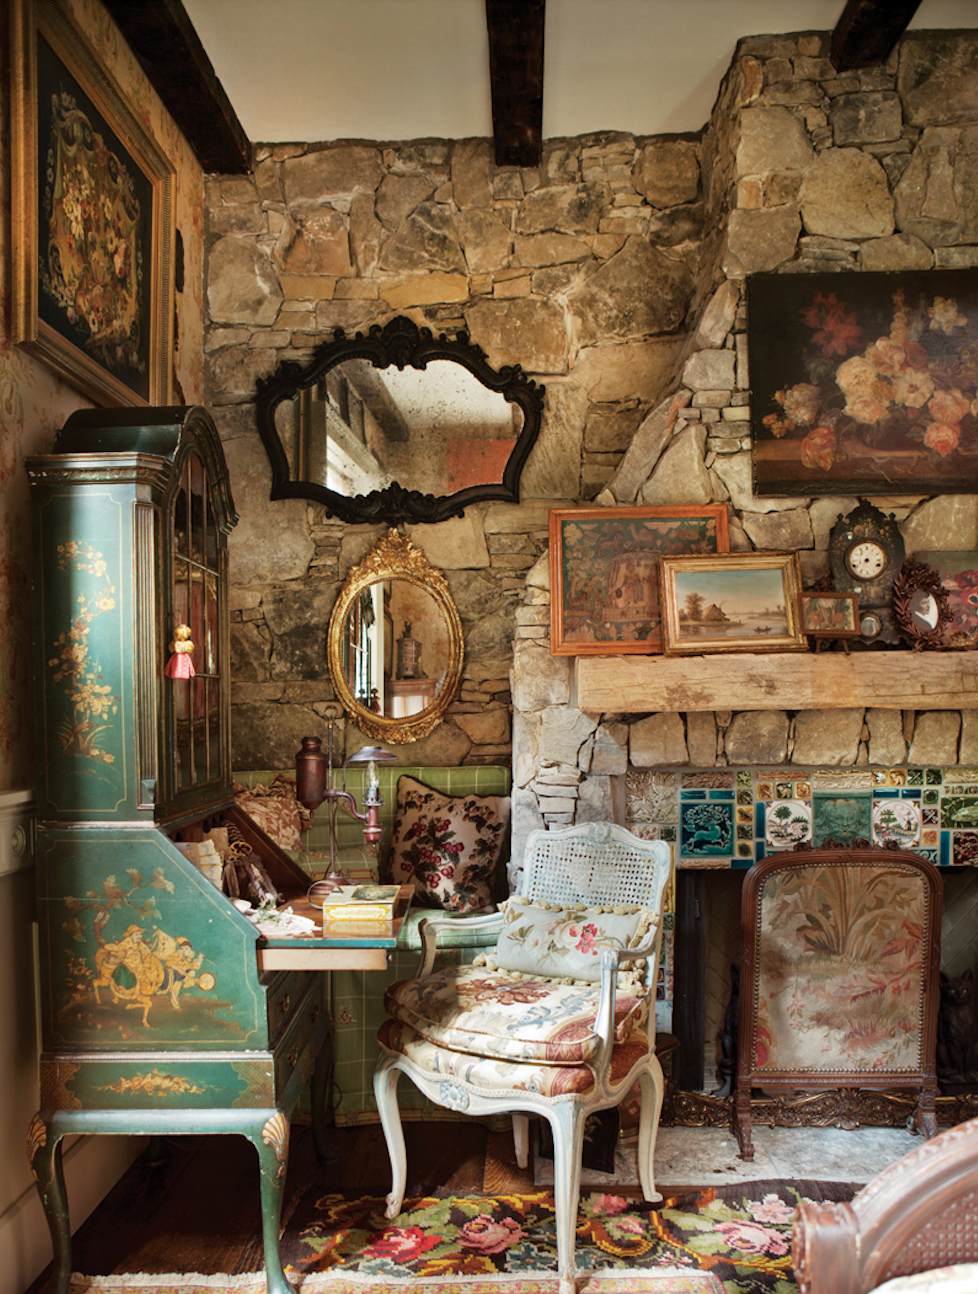 While the graceful carved furnishings lean heavily toward luxe, the stone wall and the weathered wood mantel keep the lodge element prominent.
